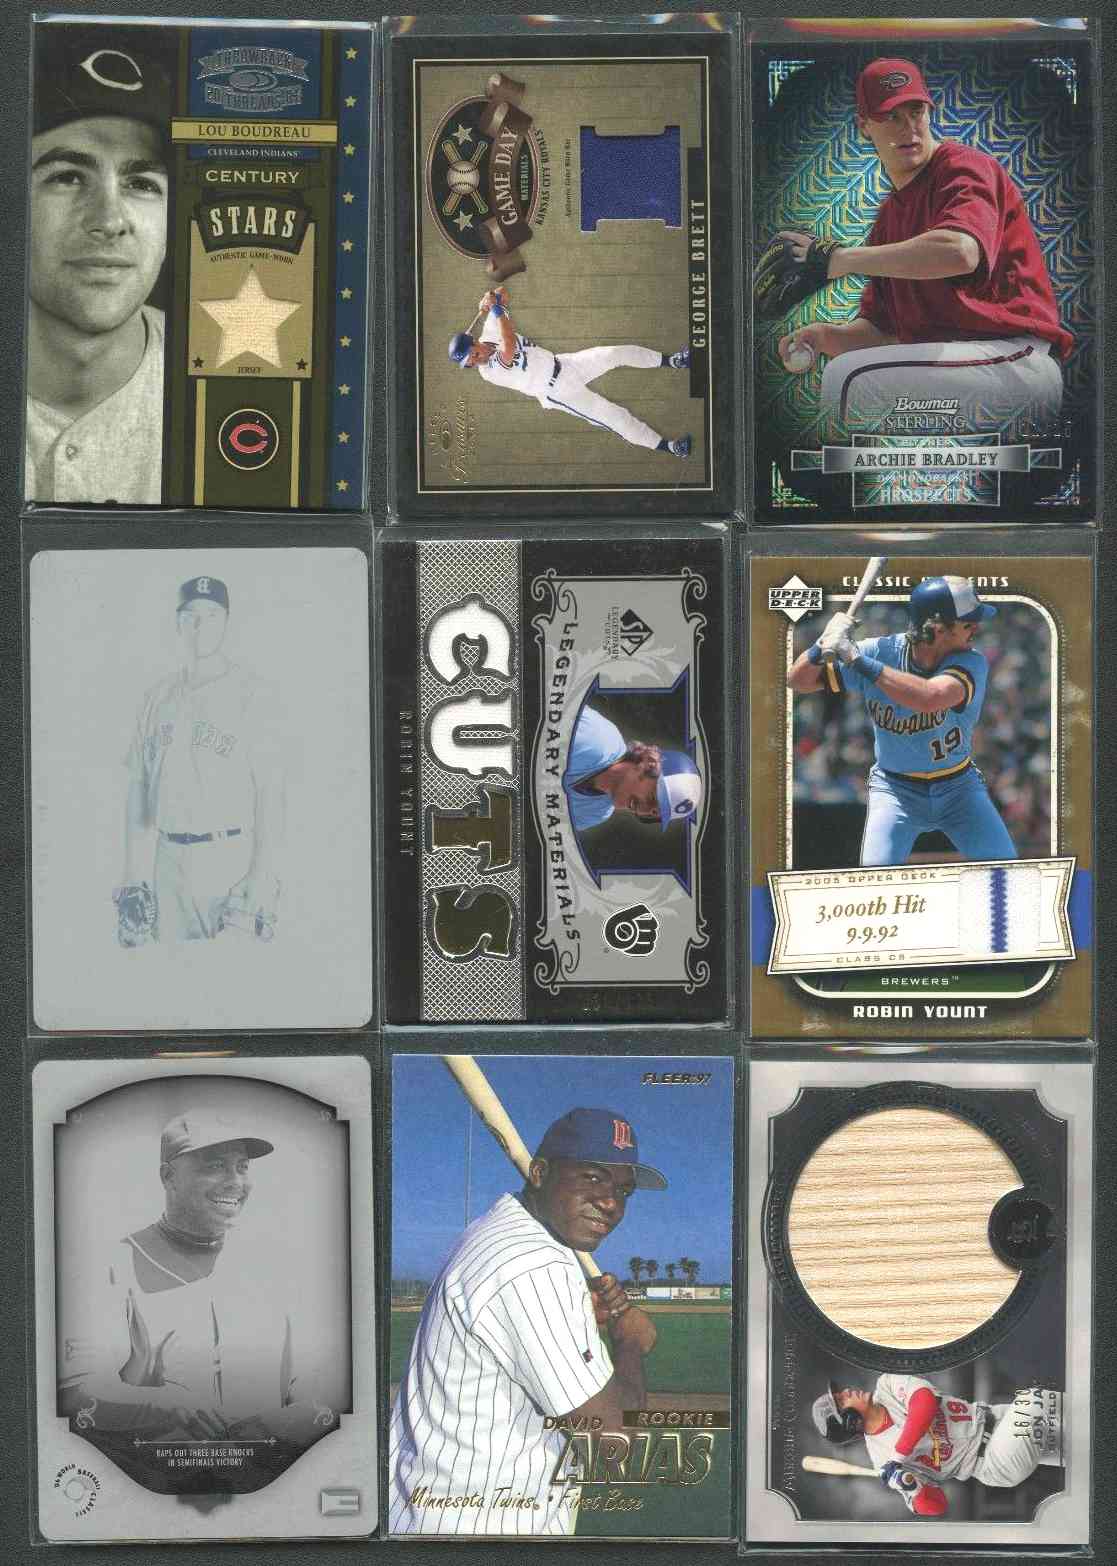 Lou Boudreau - 2004 Throwback Threads 'Century Stars' GAME-USED JERSEY Baseball cards value